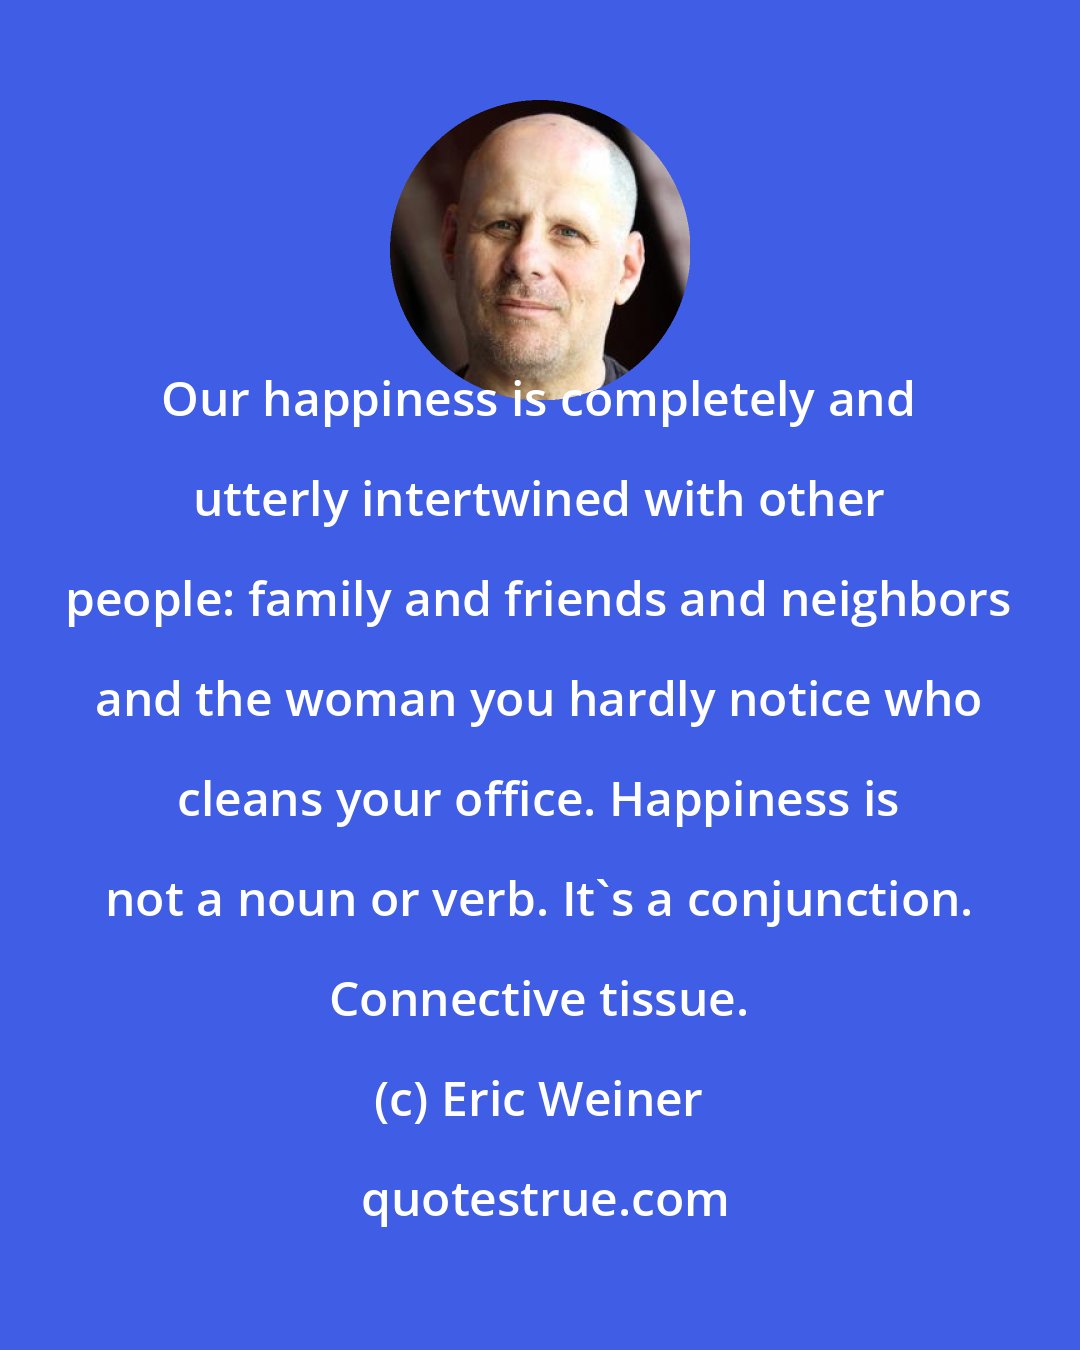 Eric Weiner: Our happiness is completely and utterly intertwined with other people: family and friends and neighbors and the woman you hardly notice who cleans your office. Happiness is not a noun or verb. It's a conjunction. Connective tissue.